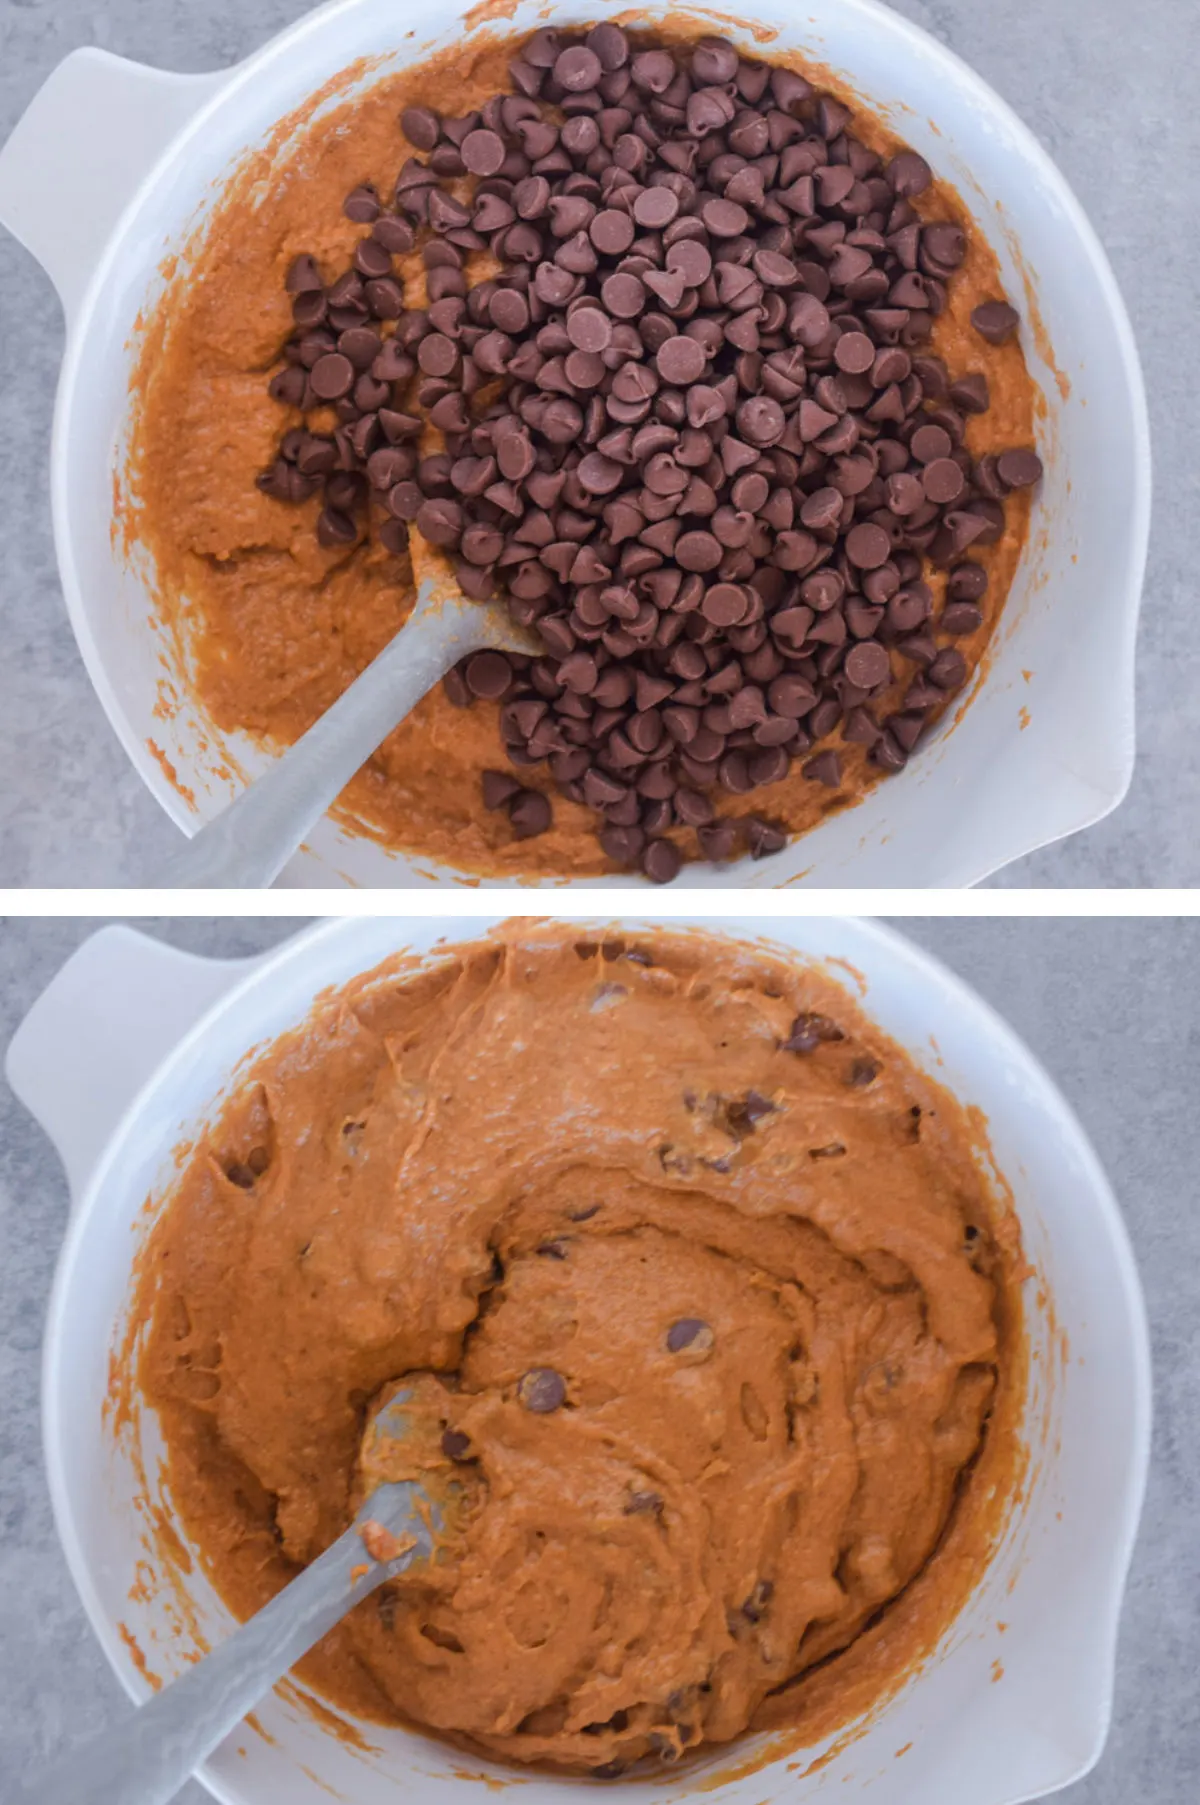 Two overhead images in one: 1. Chocolate chips are added to the batter. 2. Chocolate chips are folded into the batter. 